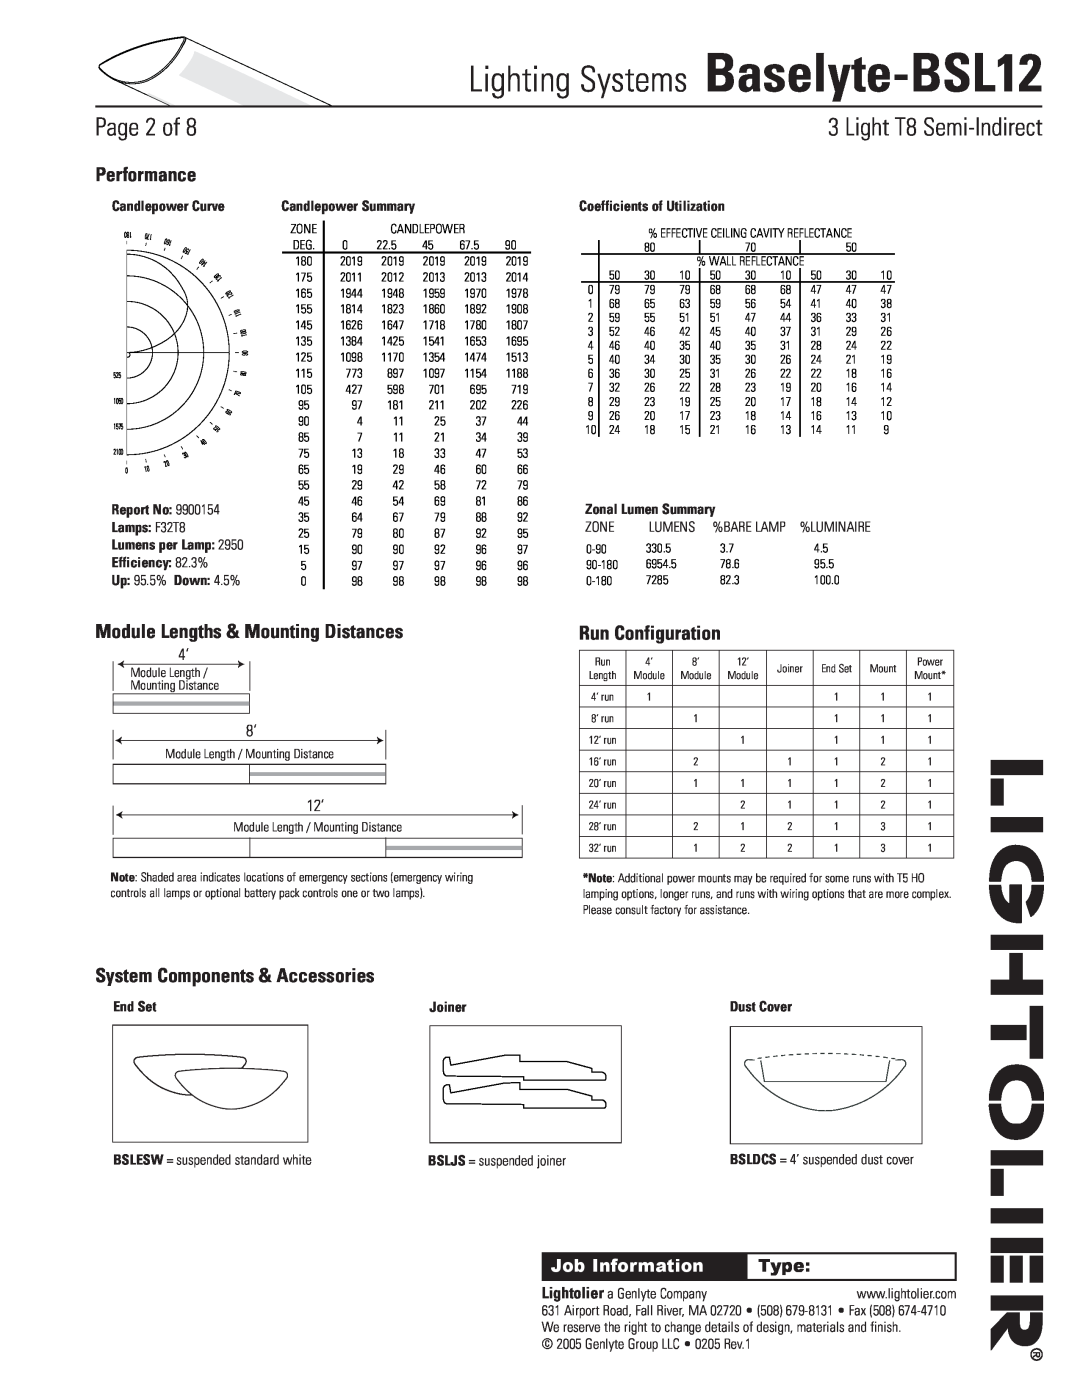 Lightolier Lighting Systems Baselyte-BSL12, Performance, Module Lengths & Mounting Distances, Run Configuration, Type 